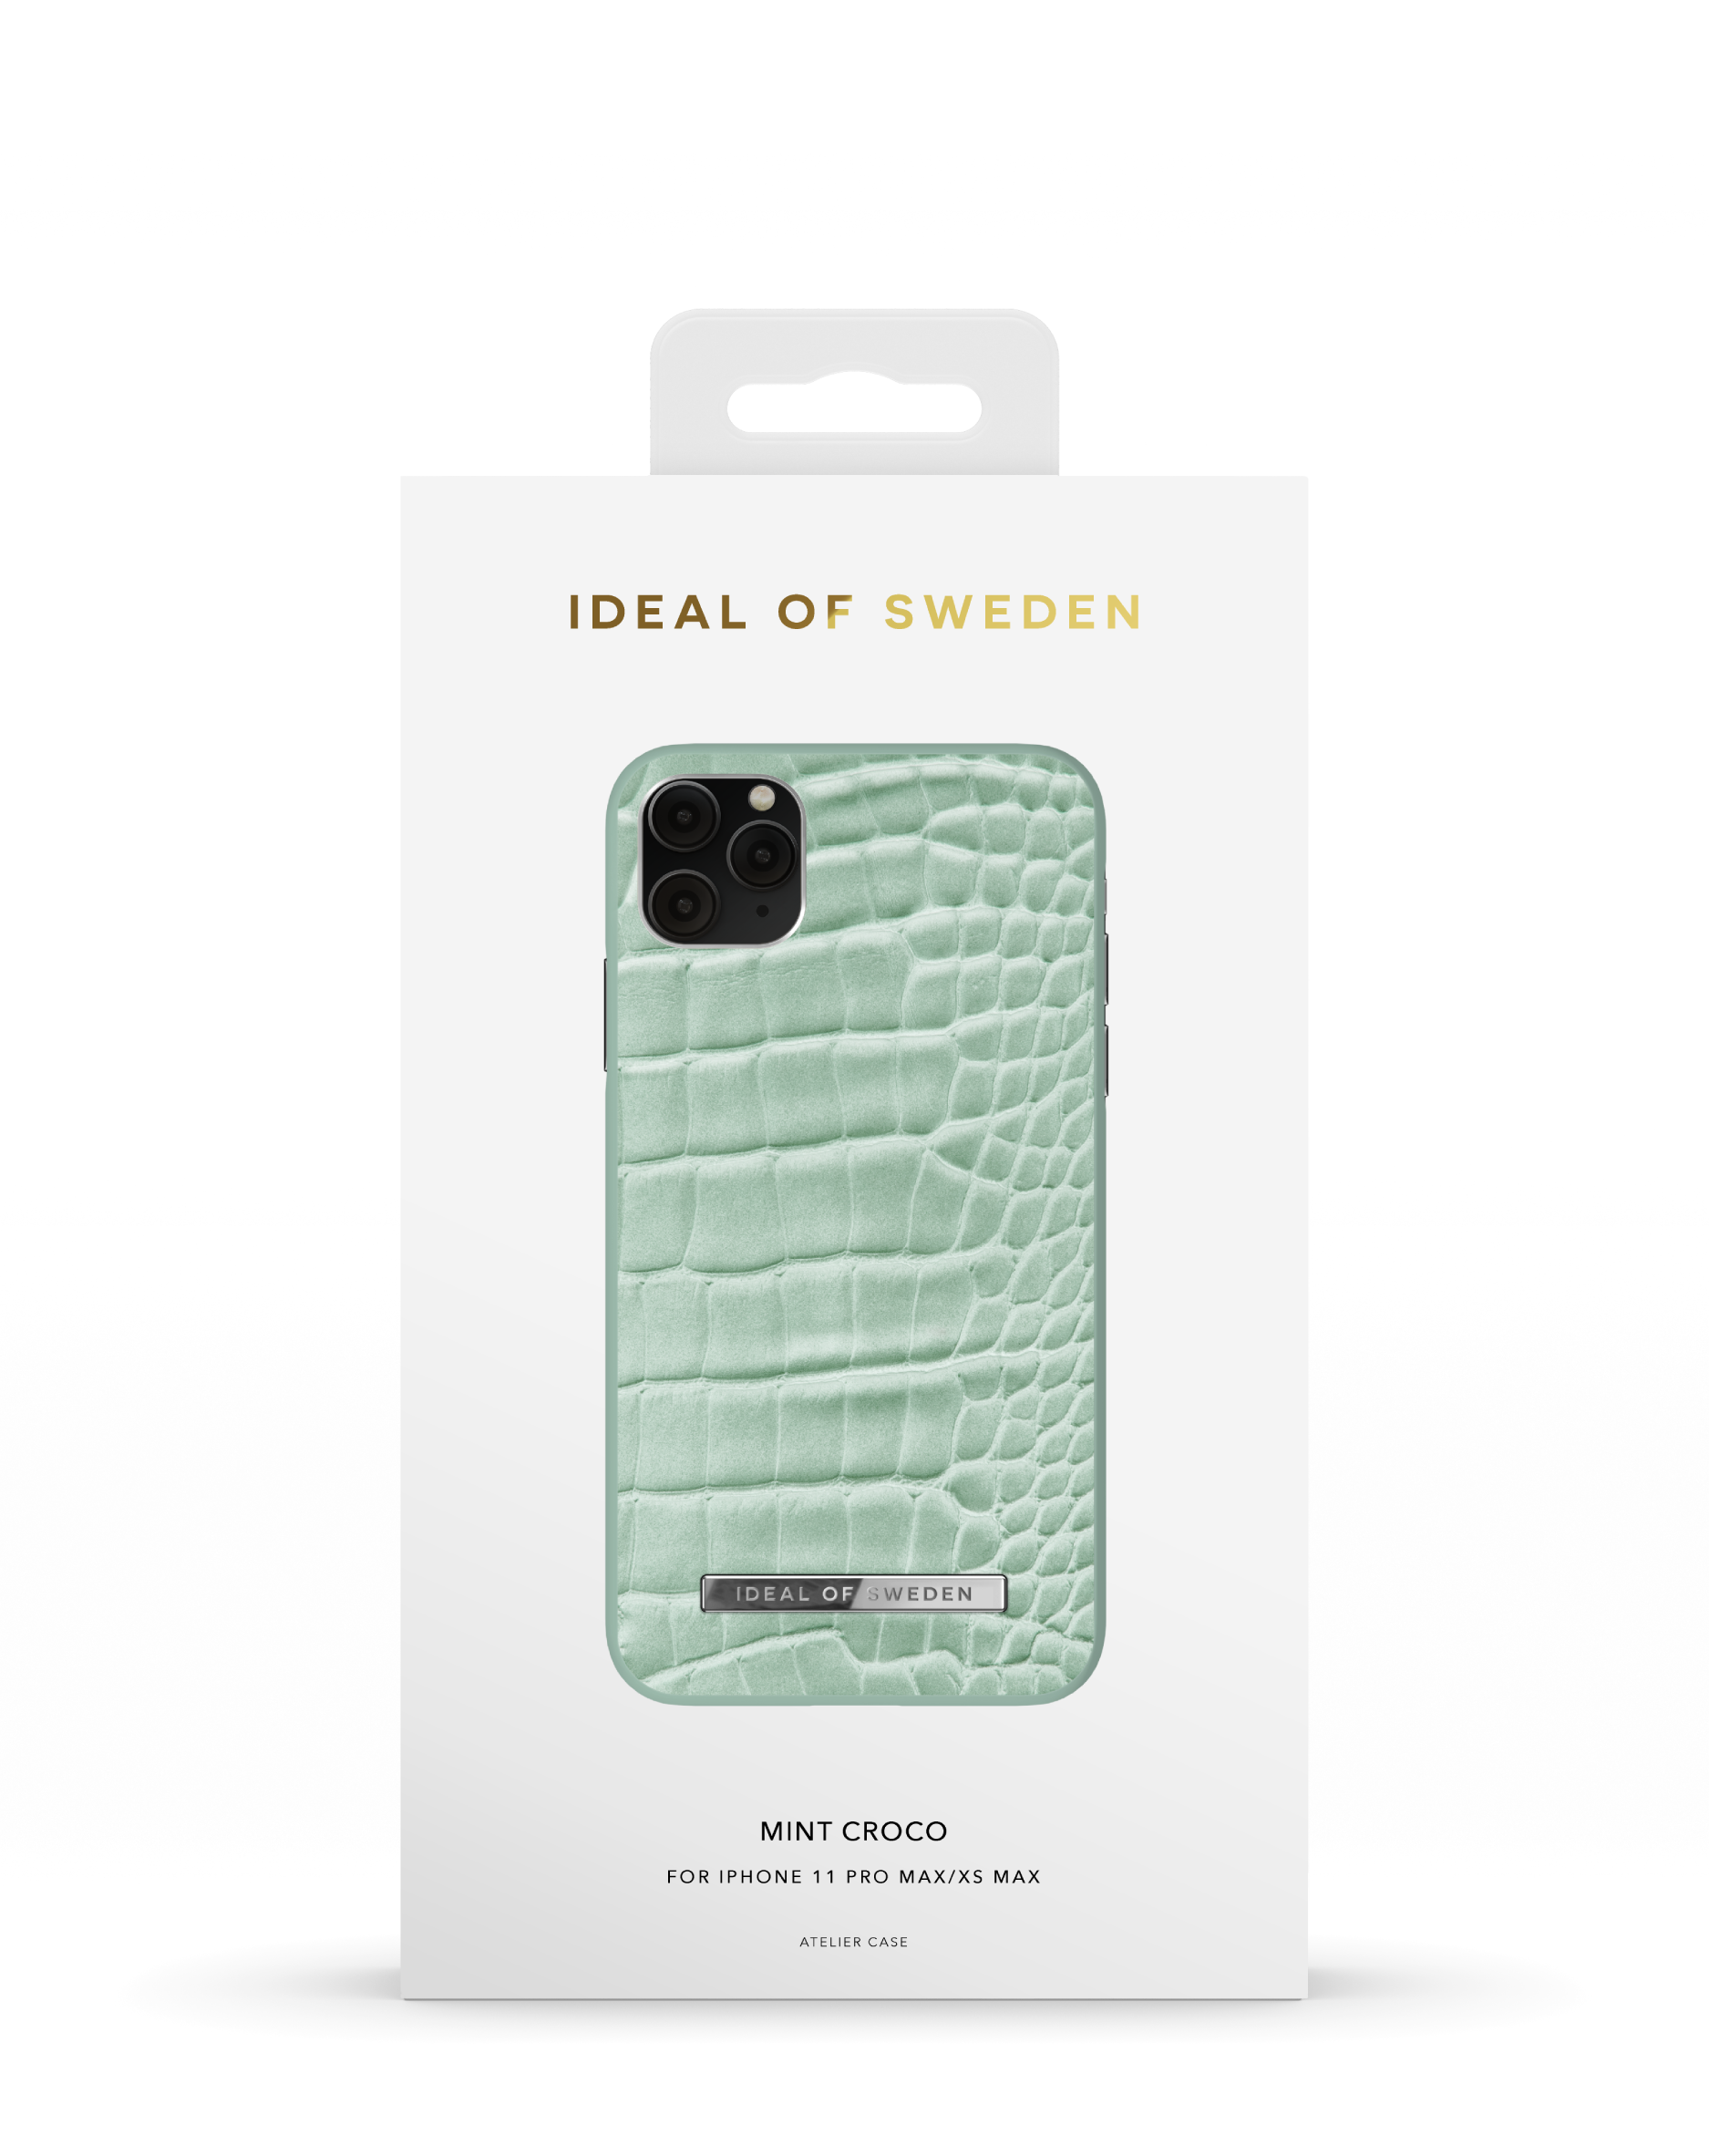 IDEAL OF Pro 11 Apple Bookcover, Max, iPhone Apple, SWEDEN XS Croco IDPWSS21-I1965-261, Mint Max, iPhone Apple